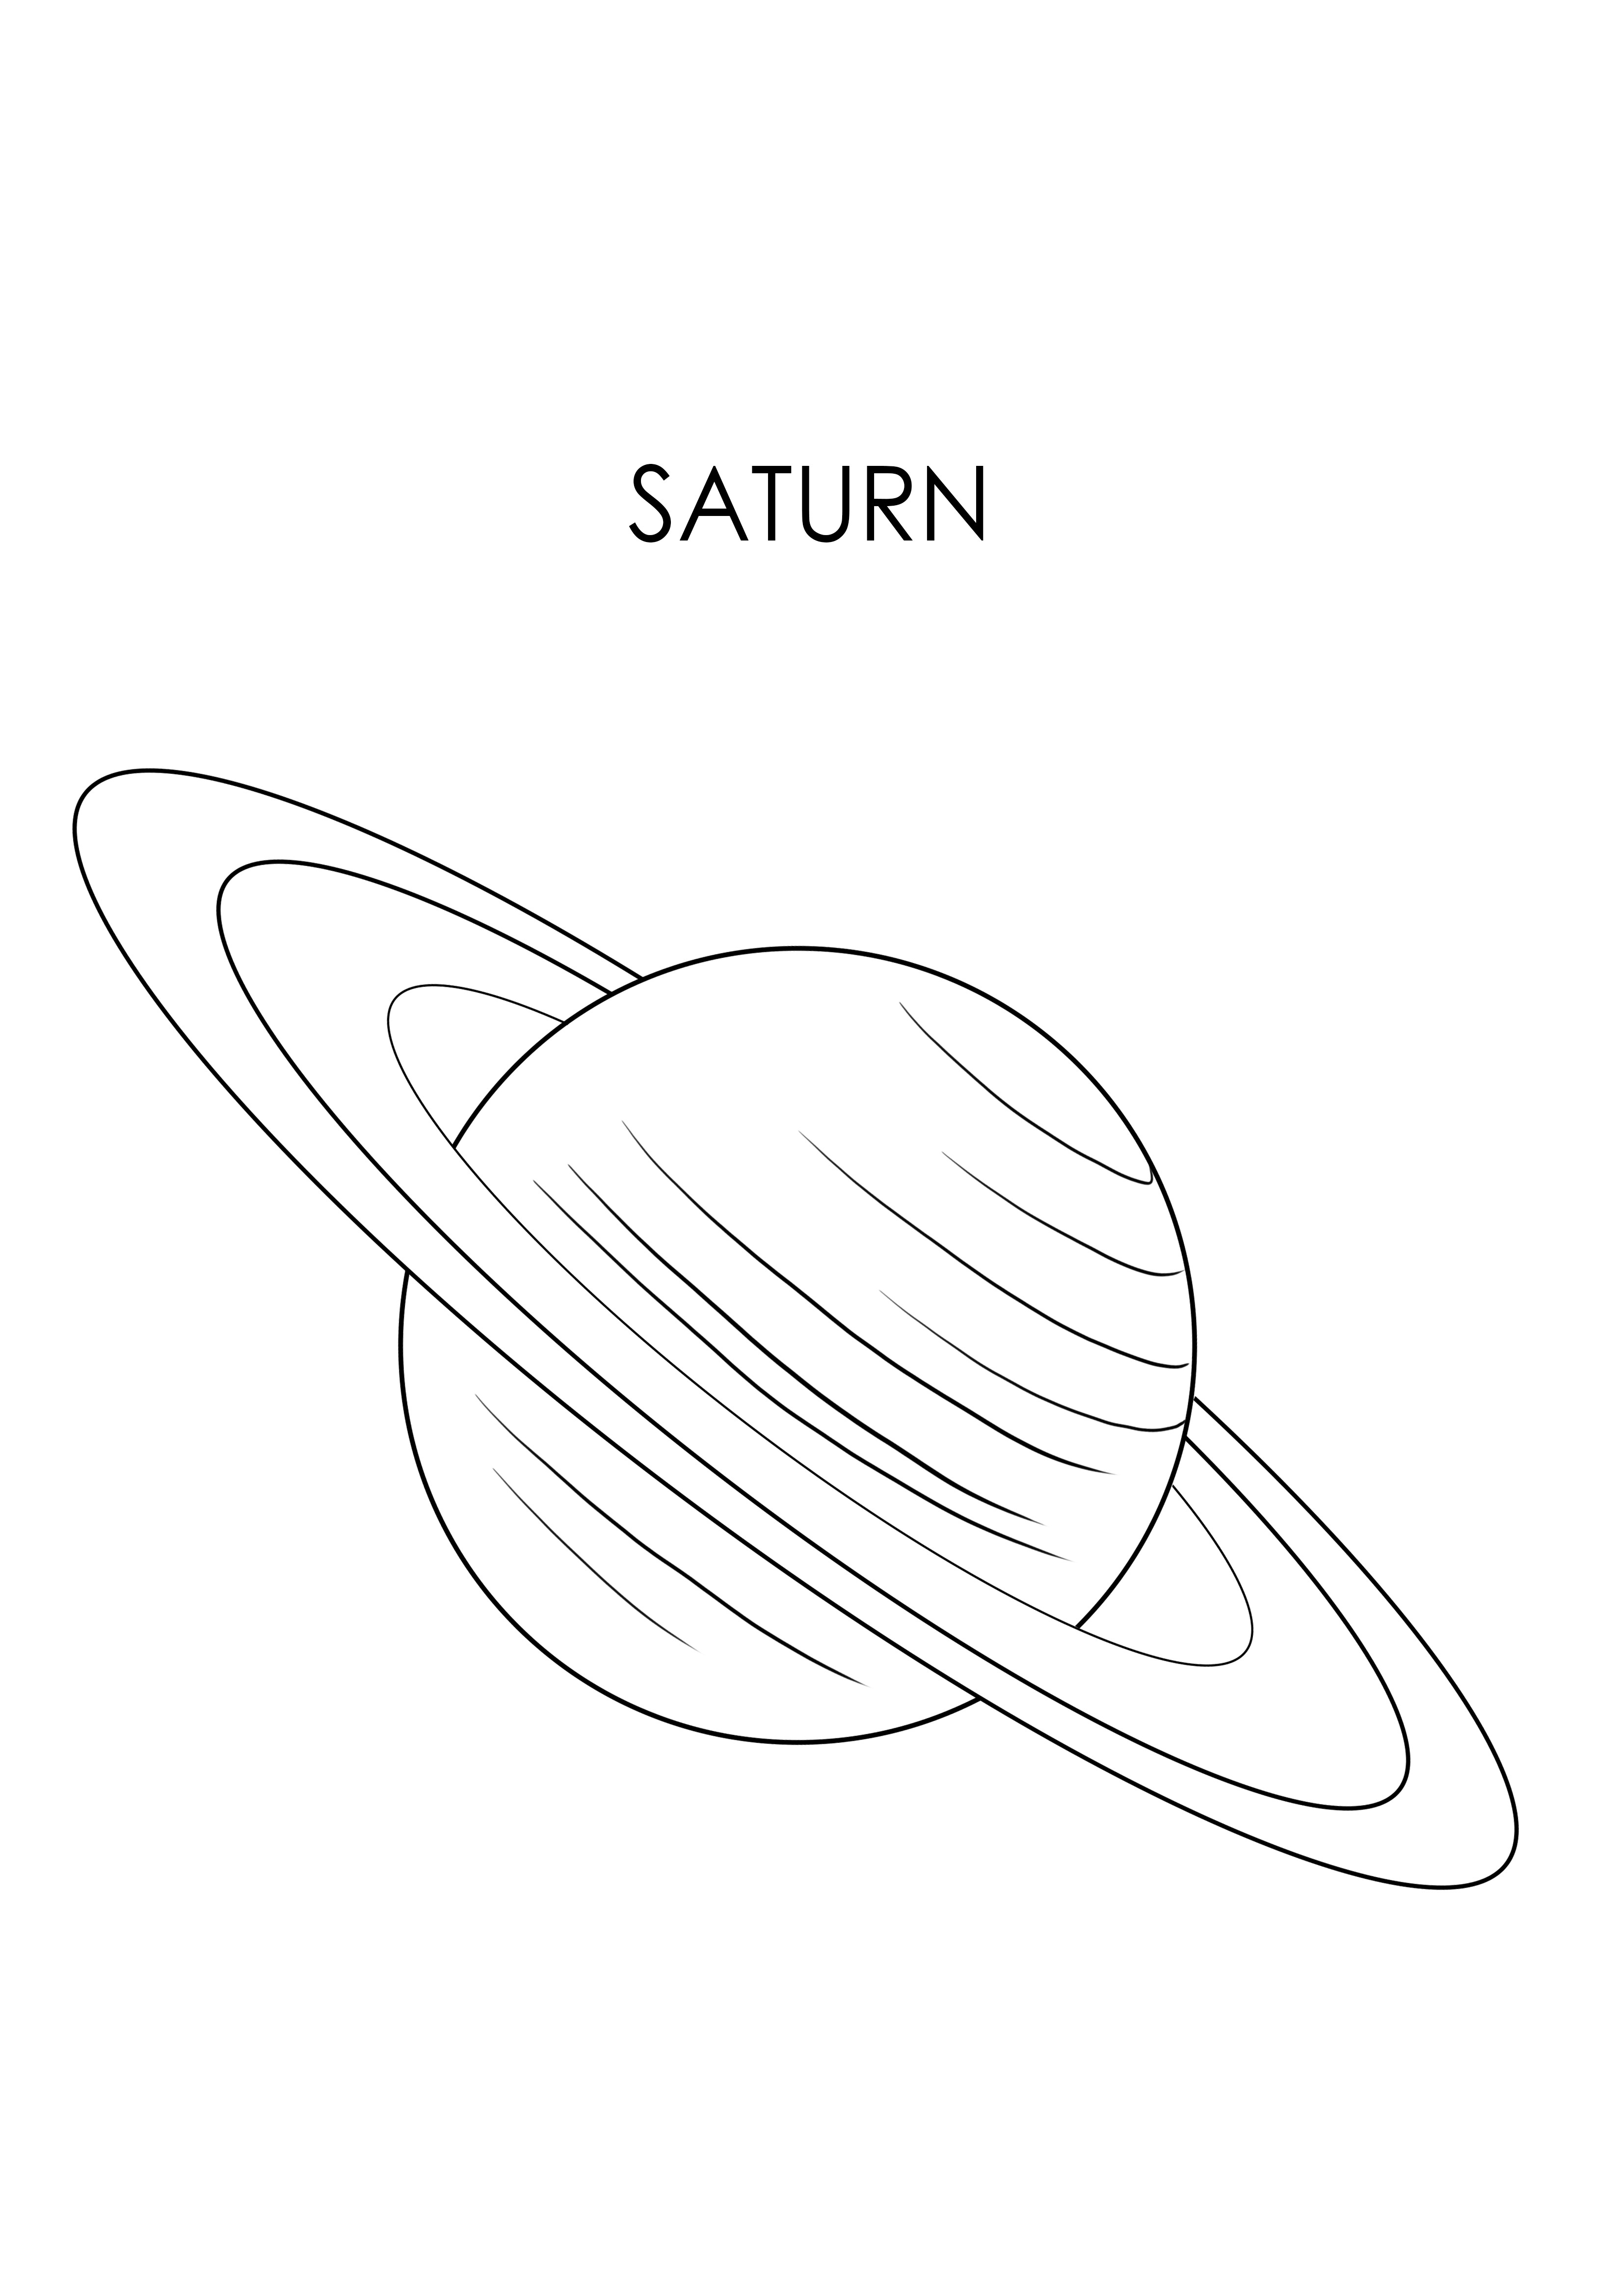 Saturn planet to download for free